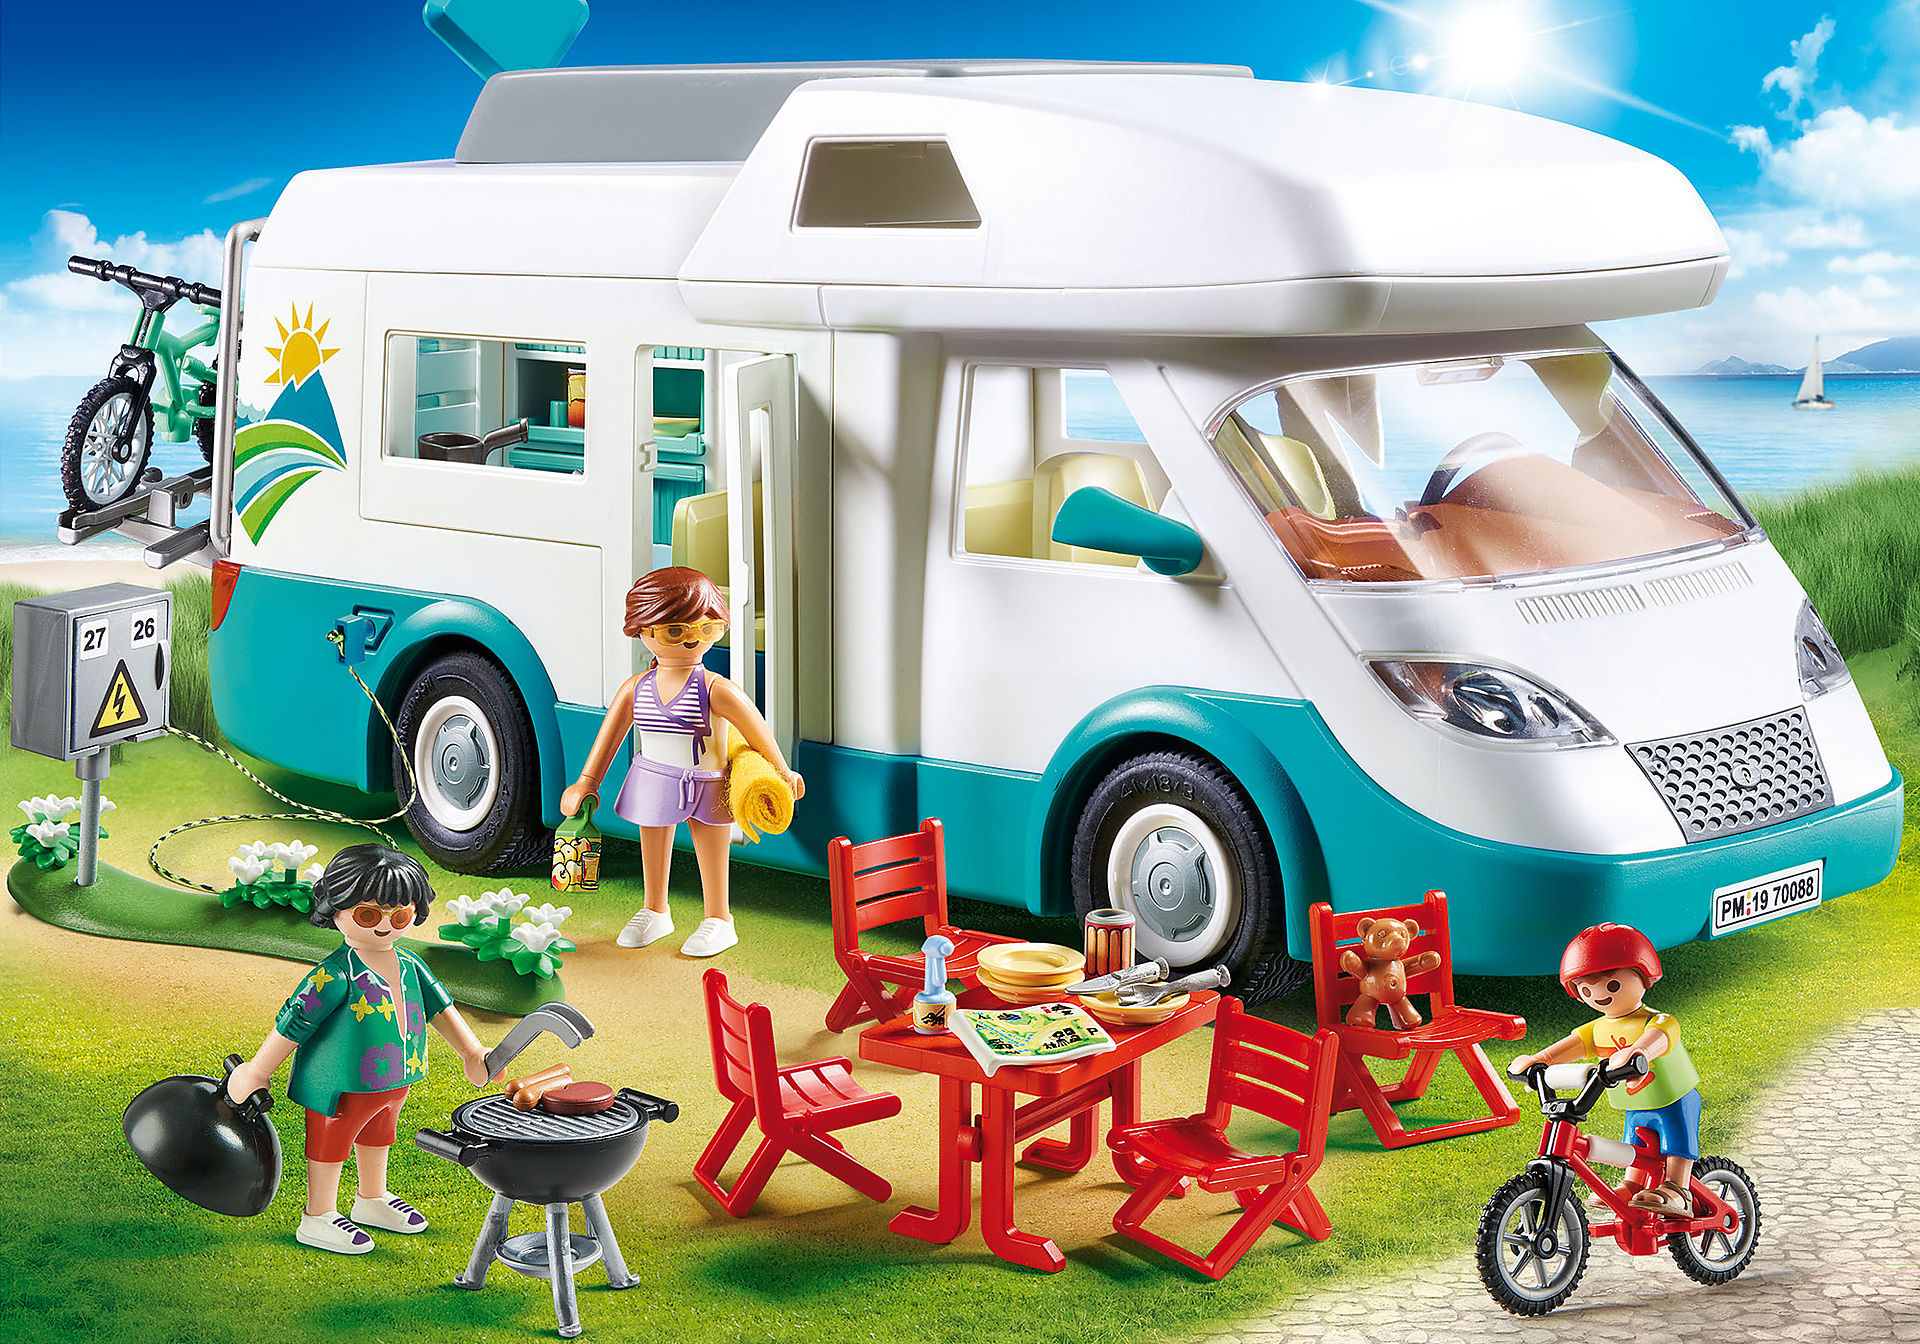 Authorization Be satisfied The Hotel RULOTA CAMPING - 70088 | PLAYMOBIL®